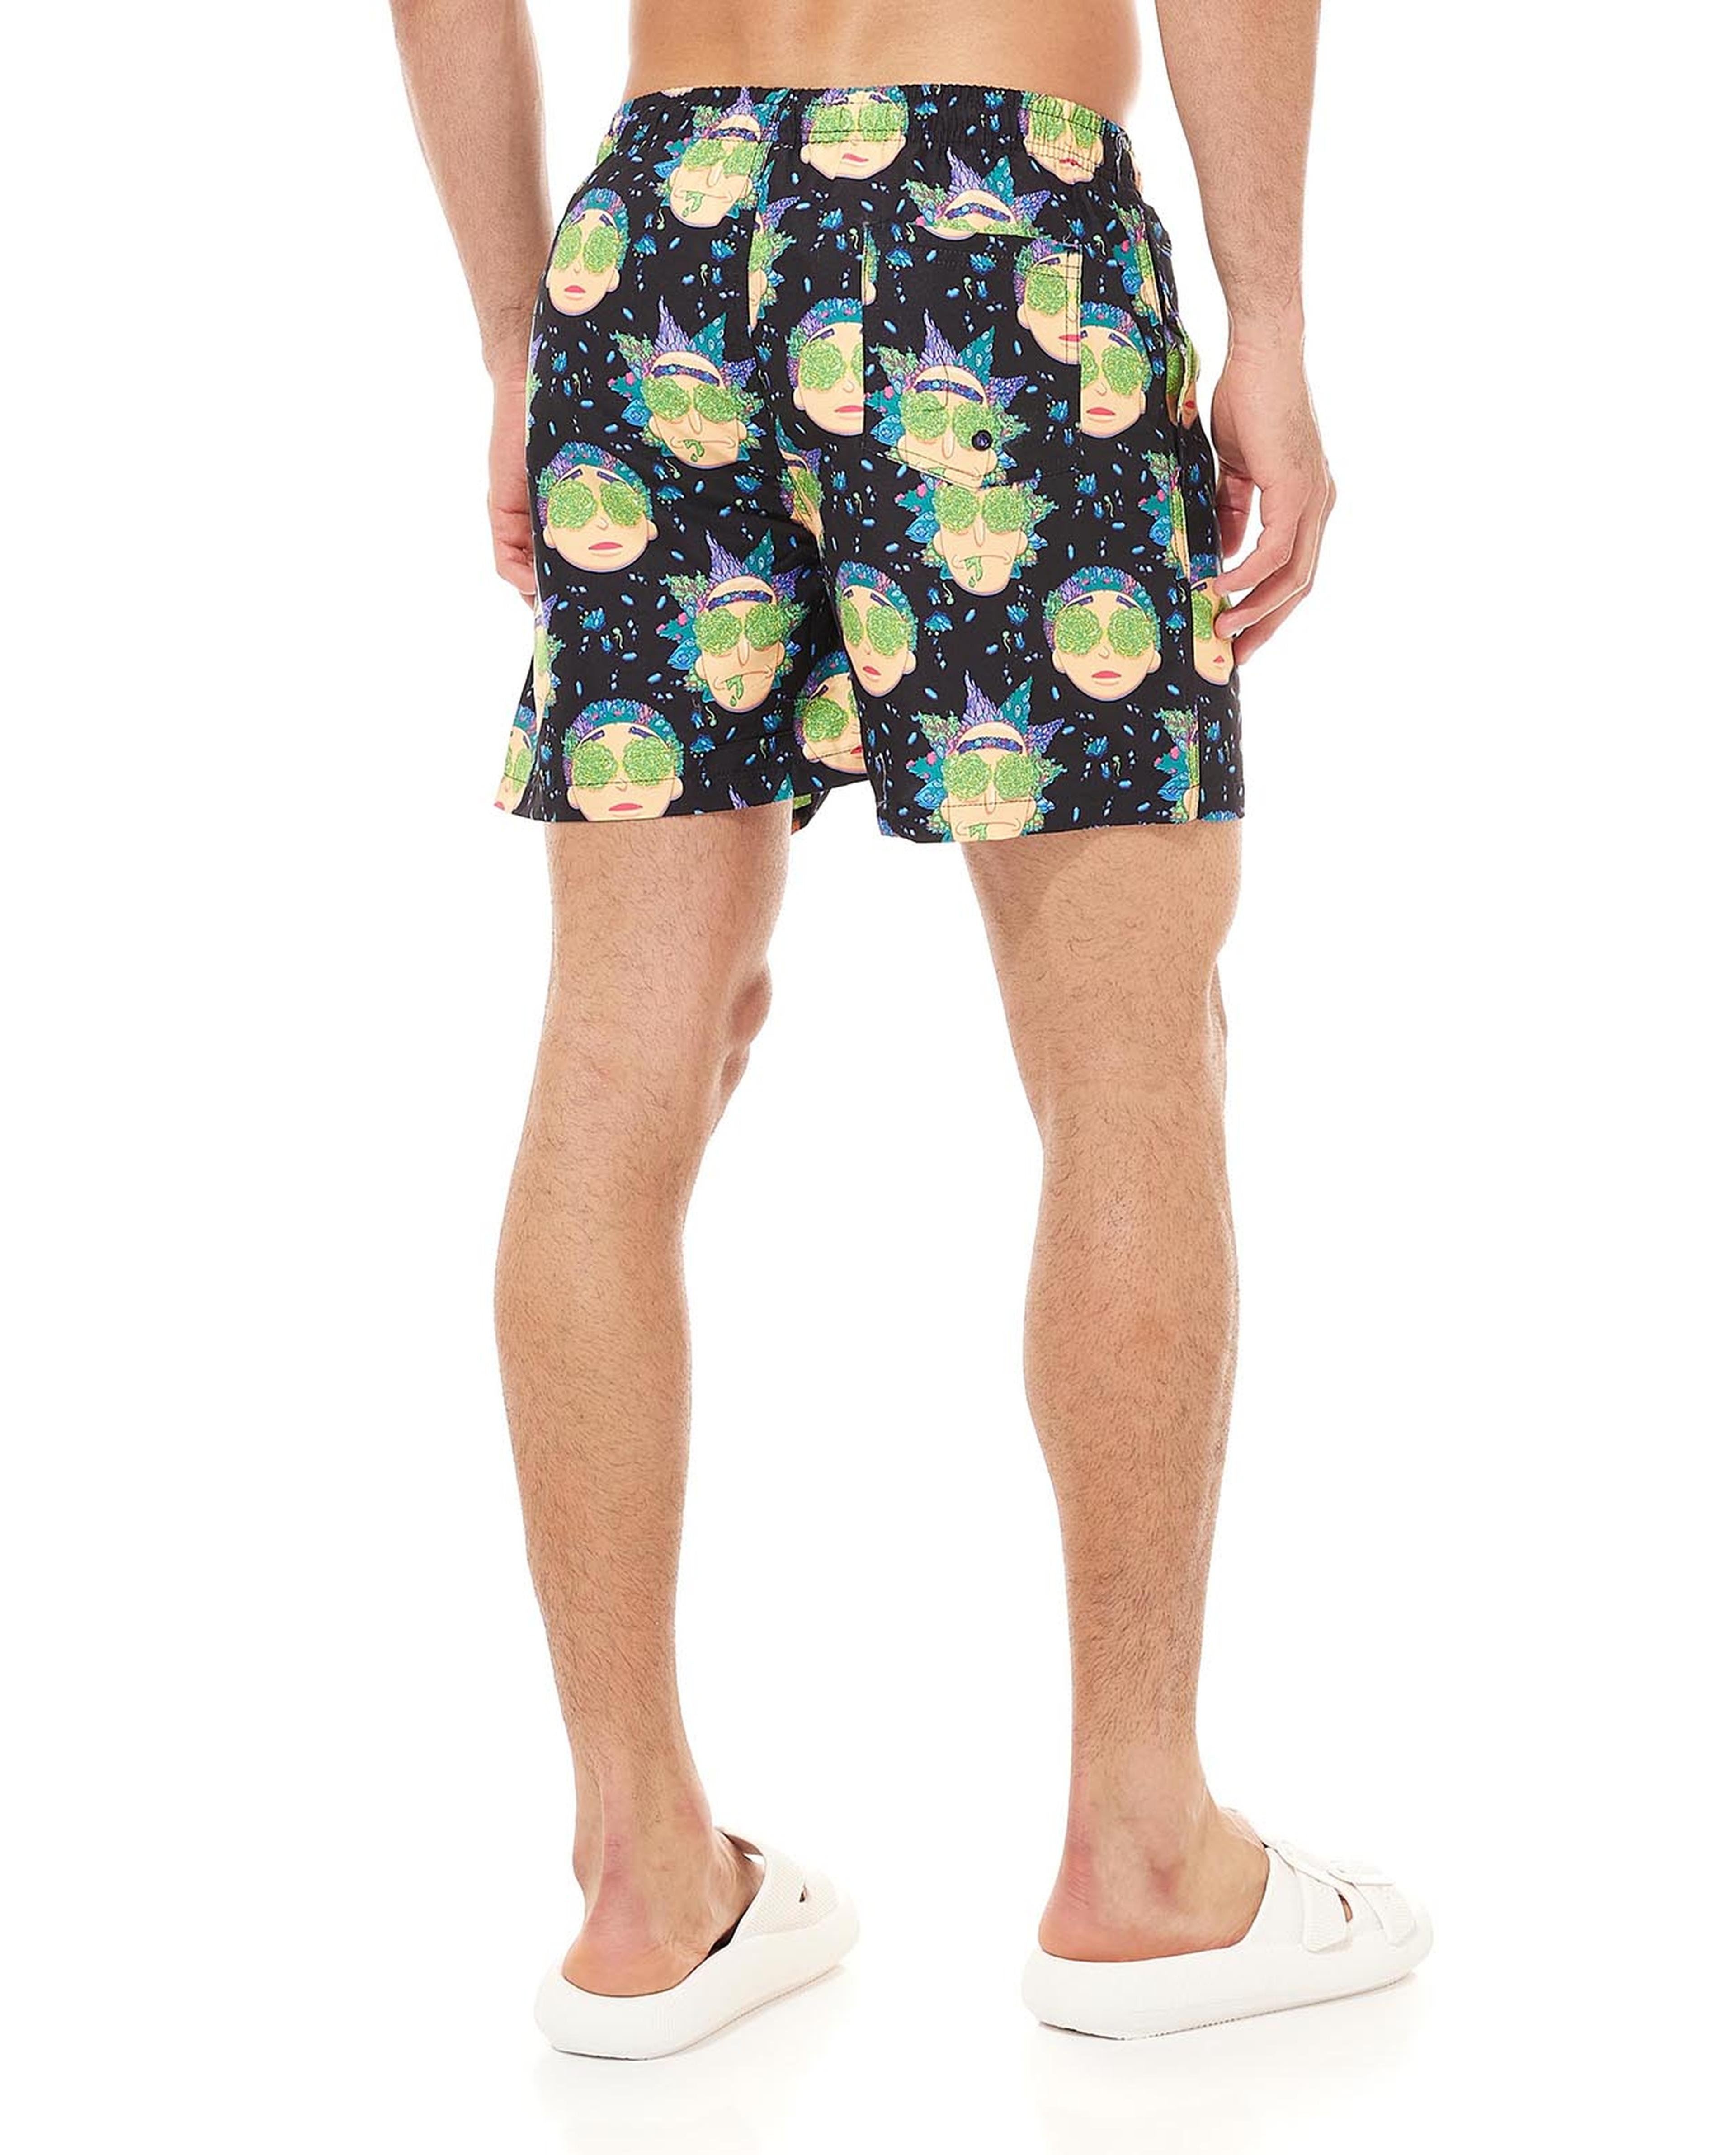 All Over Print Shorts with Drawstring Waist